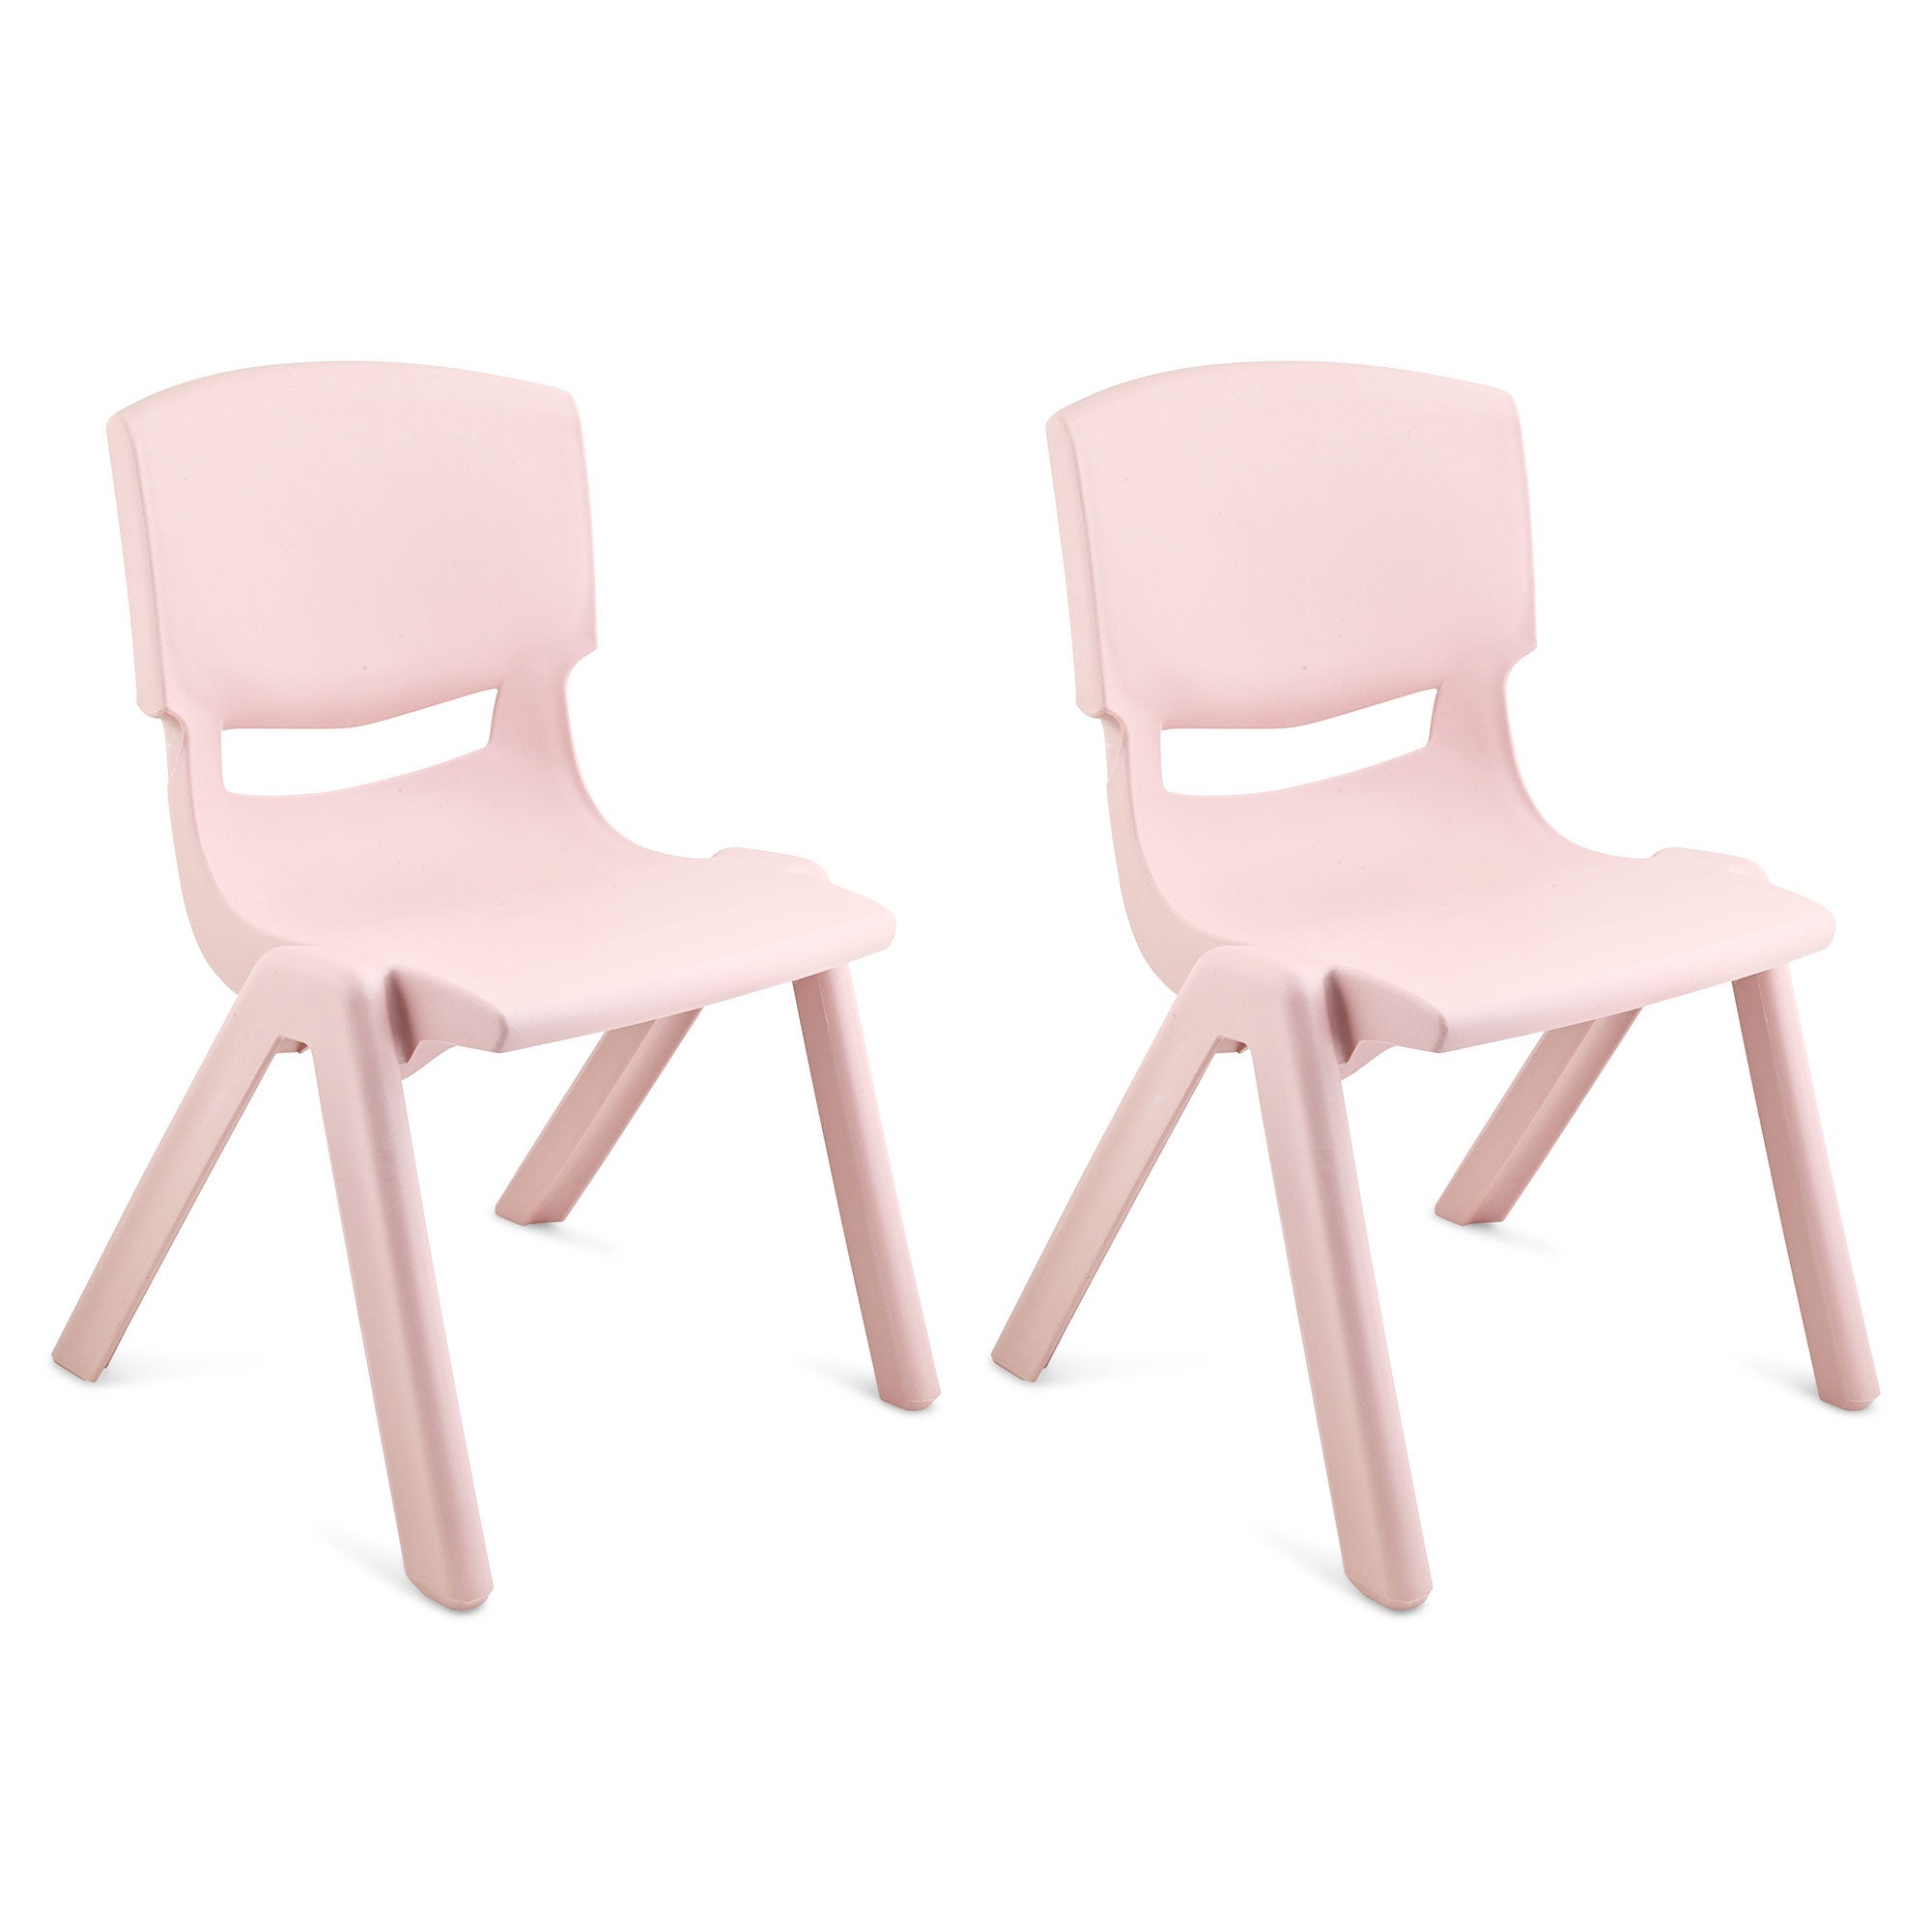 JOON Stackable Plastic Kids Learning Chairs, Blush, 20.5x12.75X11 Inches, 2-Pack (Pack of 2)